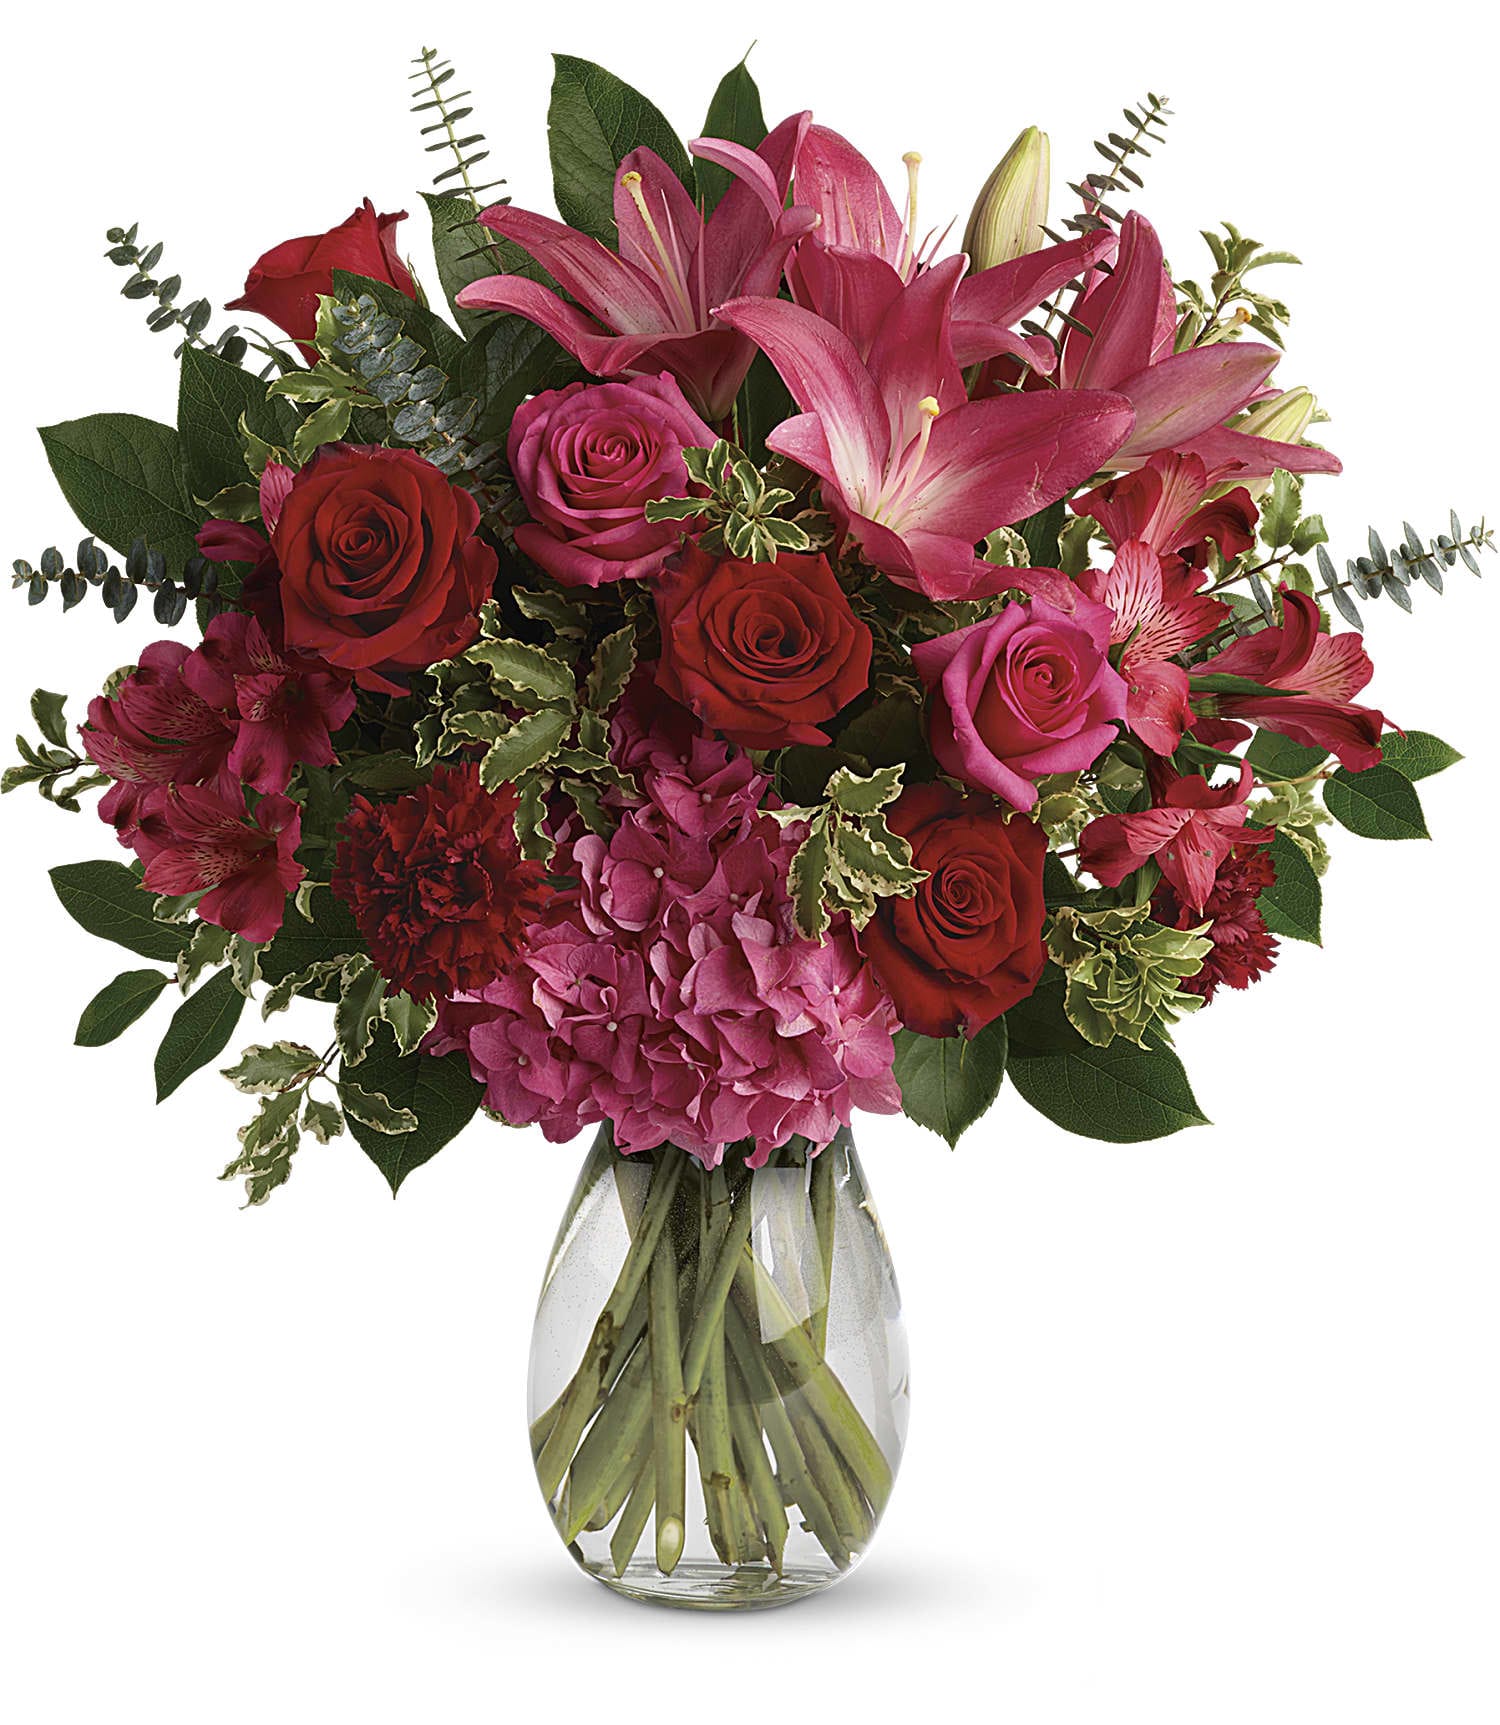 Love Struck Bouquet 1 - A luxurious bouquet that's sure to leave your special someone absolutely love struck! There's no denying the dramatic beauty of these radiant, red hot roses, hydrangea and lilies. 